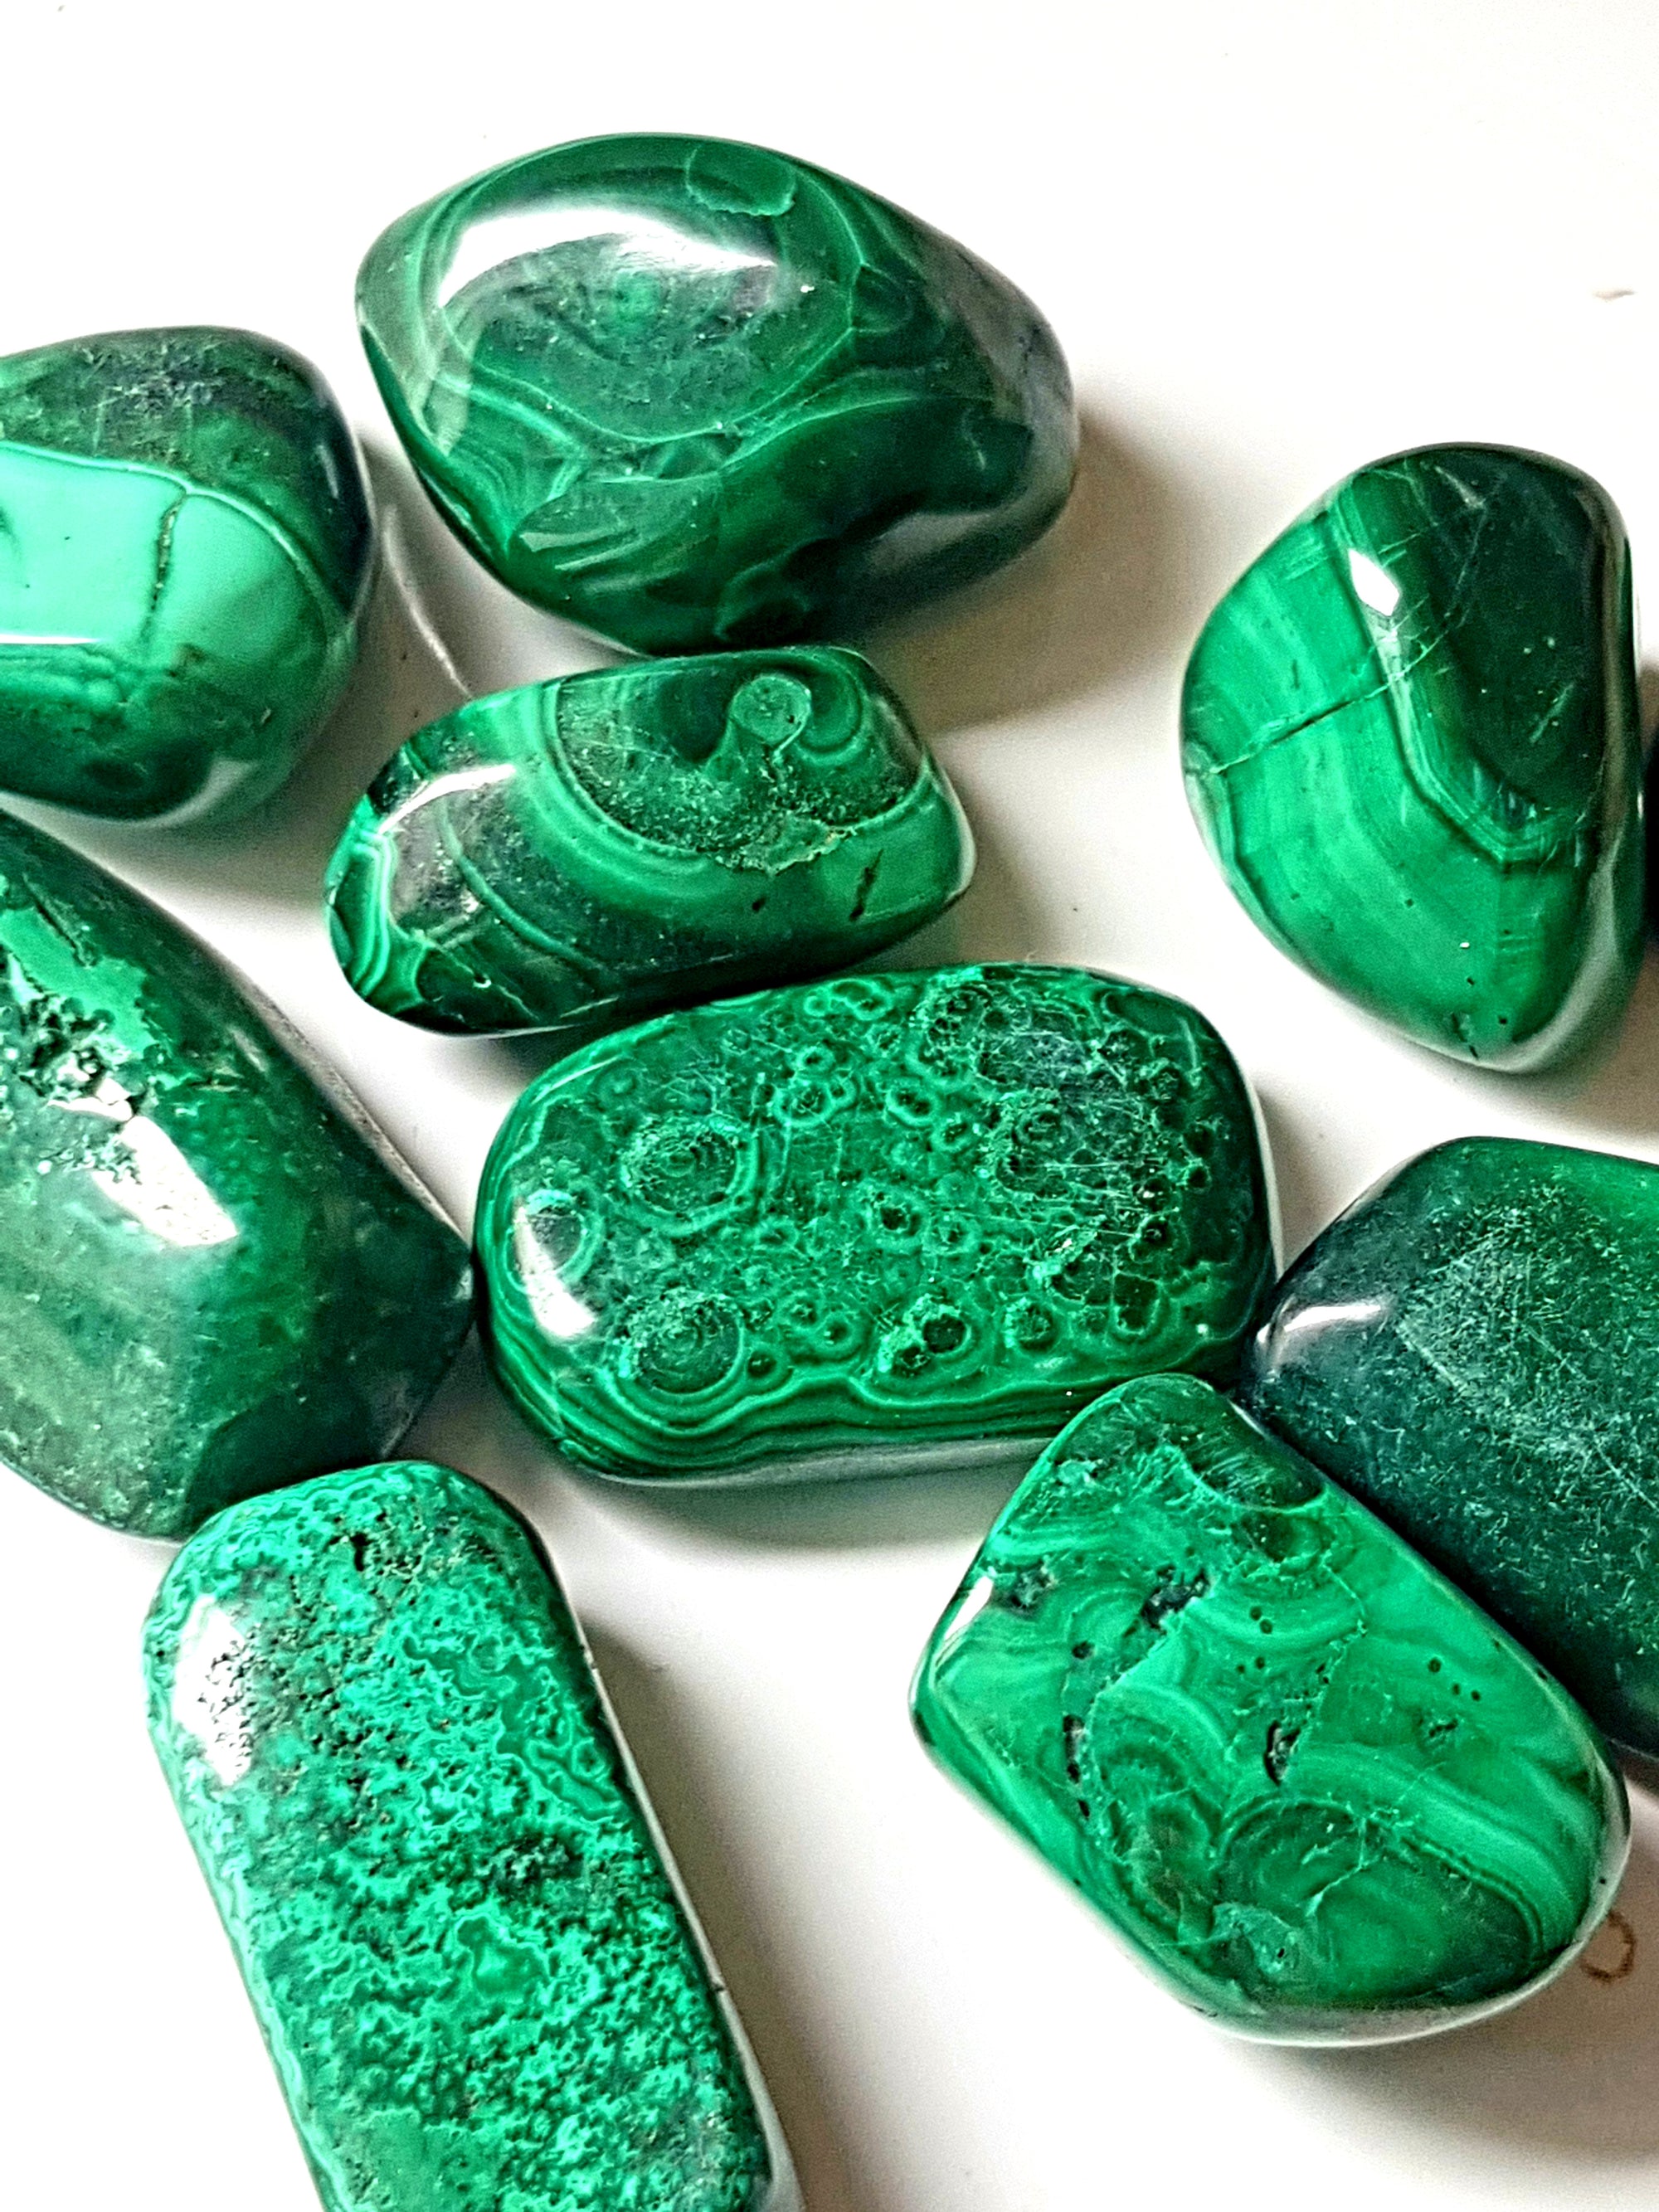 nine tumbled pieces of malachite. the pieces are smooth and elongate. They are banded and vary in colour from green to dark green. Some of the bands are patterned and look like little eyes.